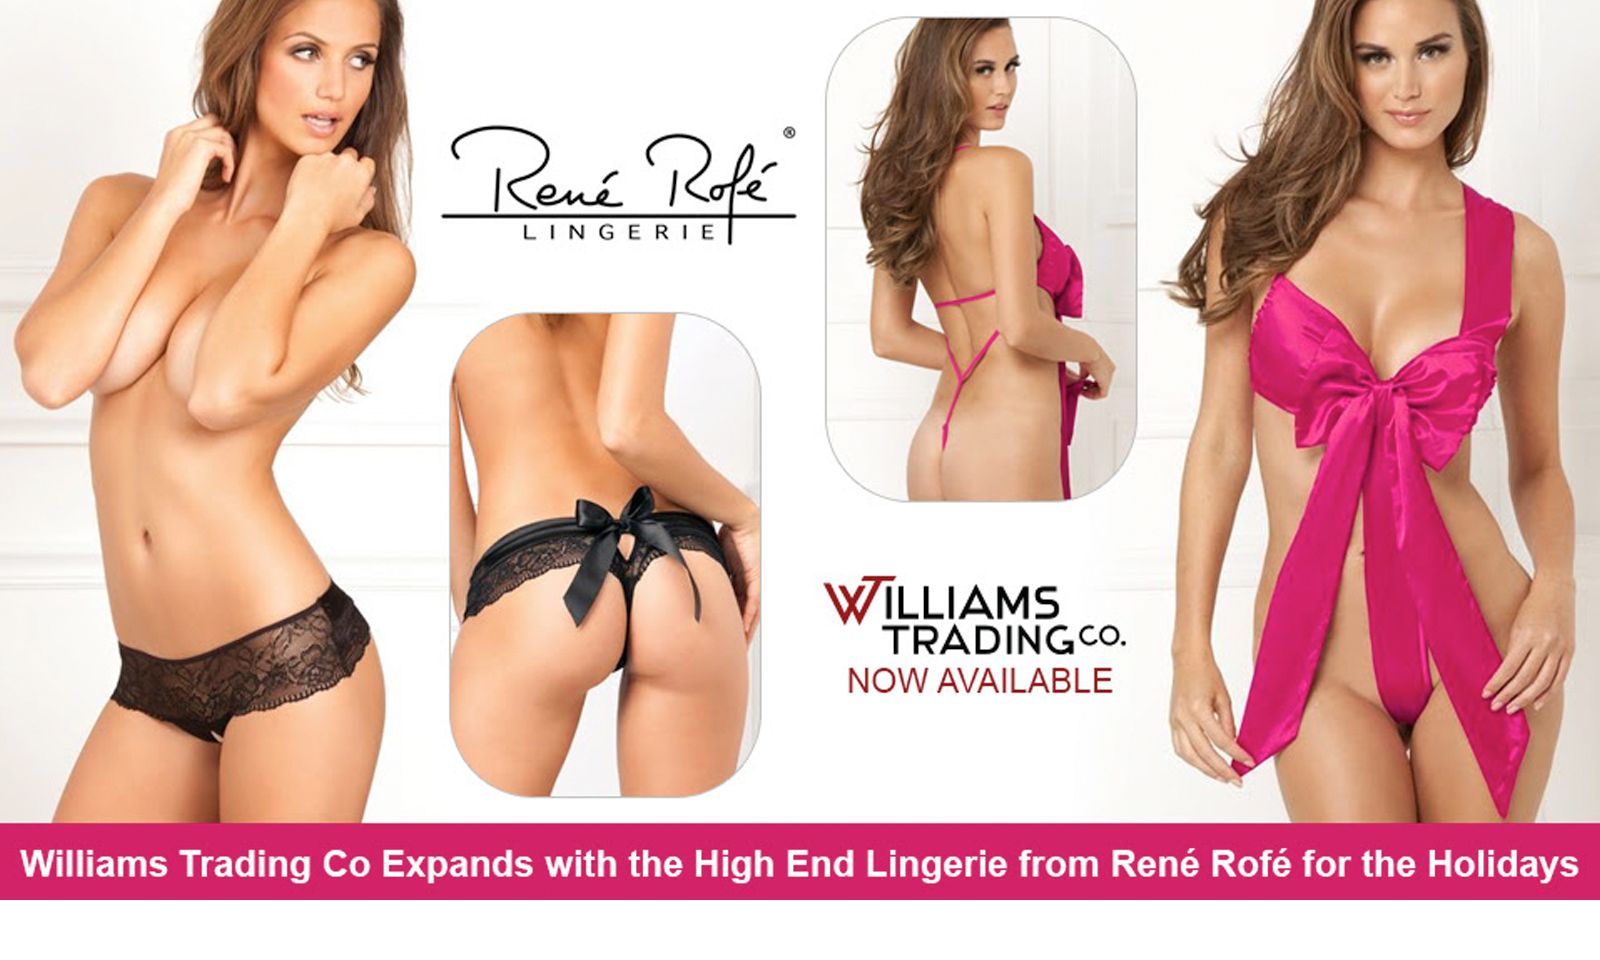 New Rene Rofe In Stock at Williams Trading In Time For Holidays